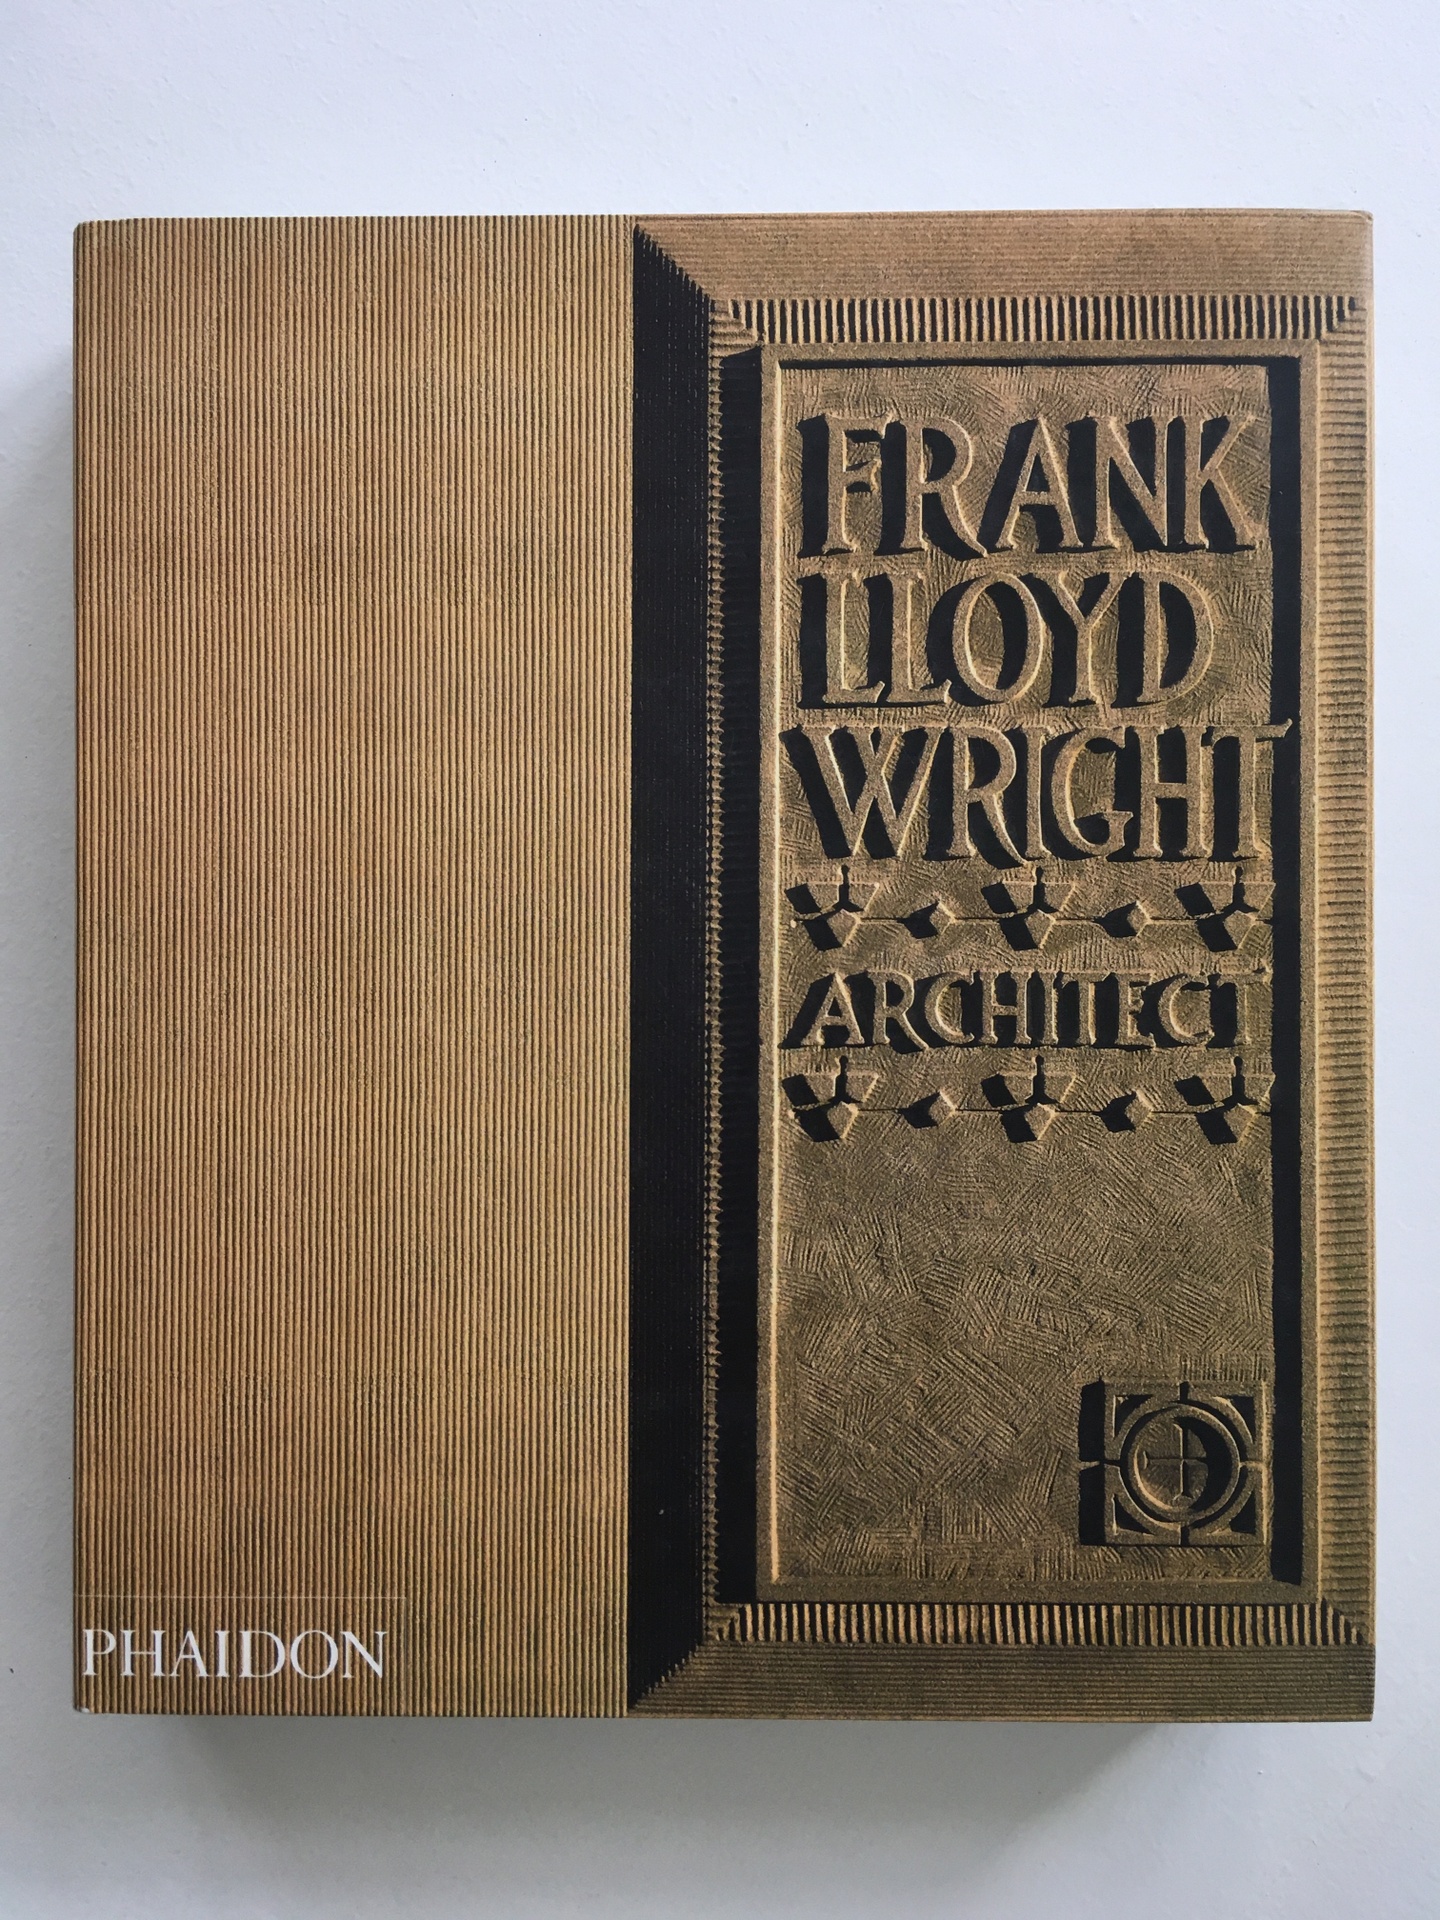 Cover of Frank Lloyd Wright, featuring a bronze cover with embossed title type.